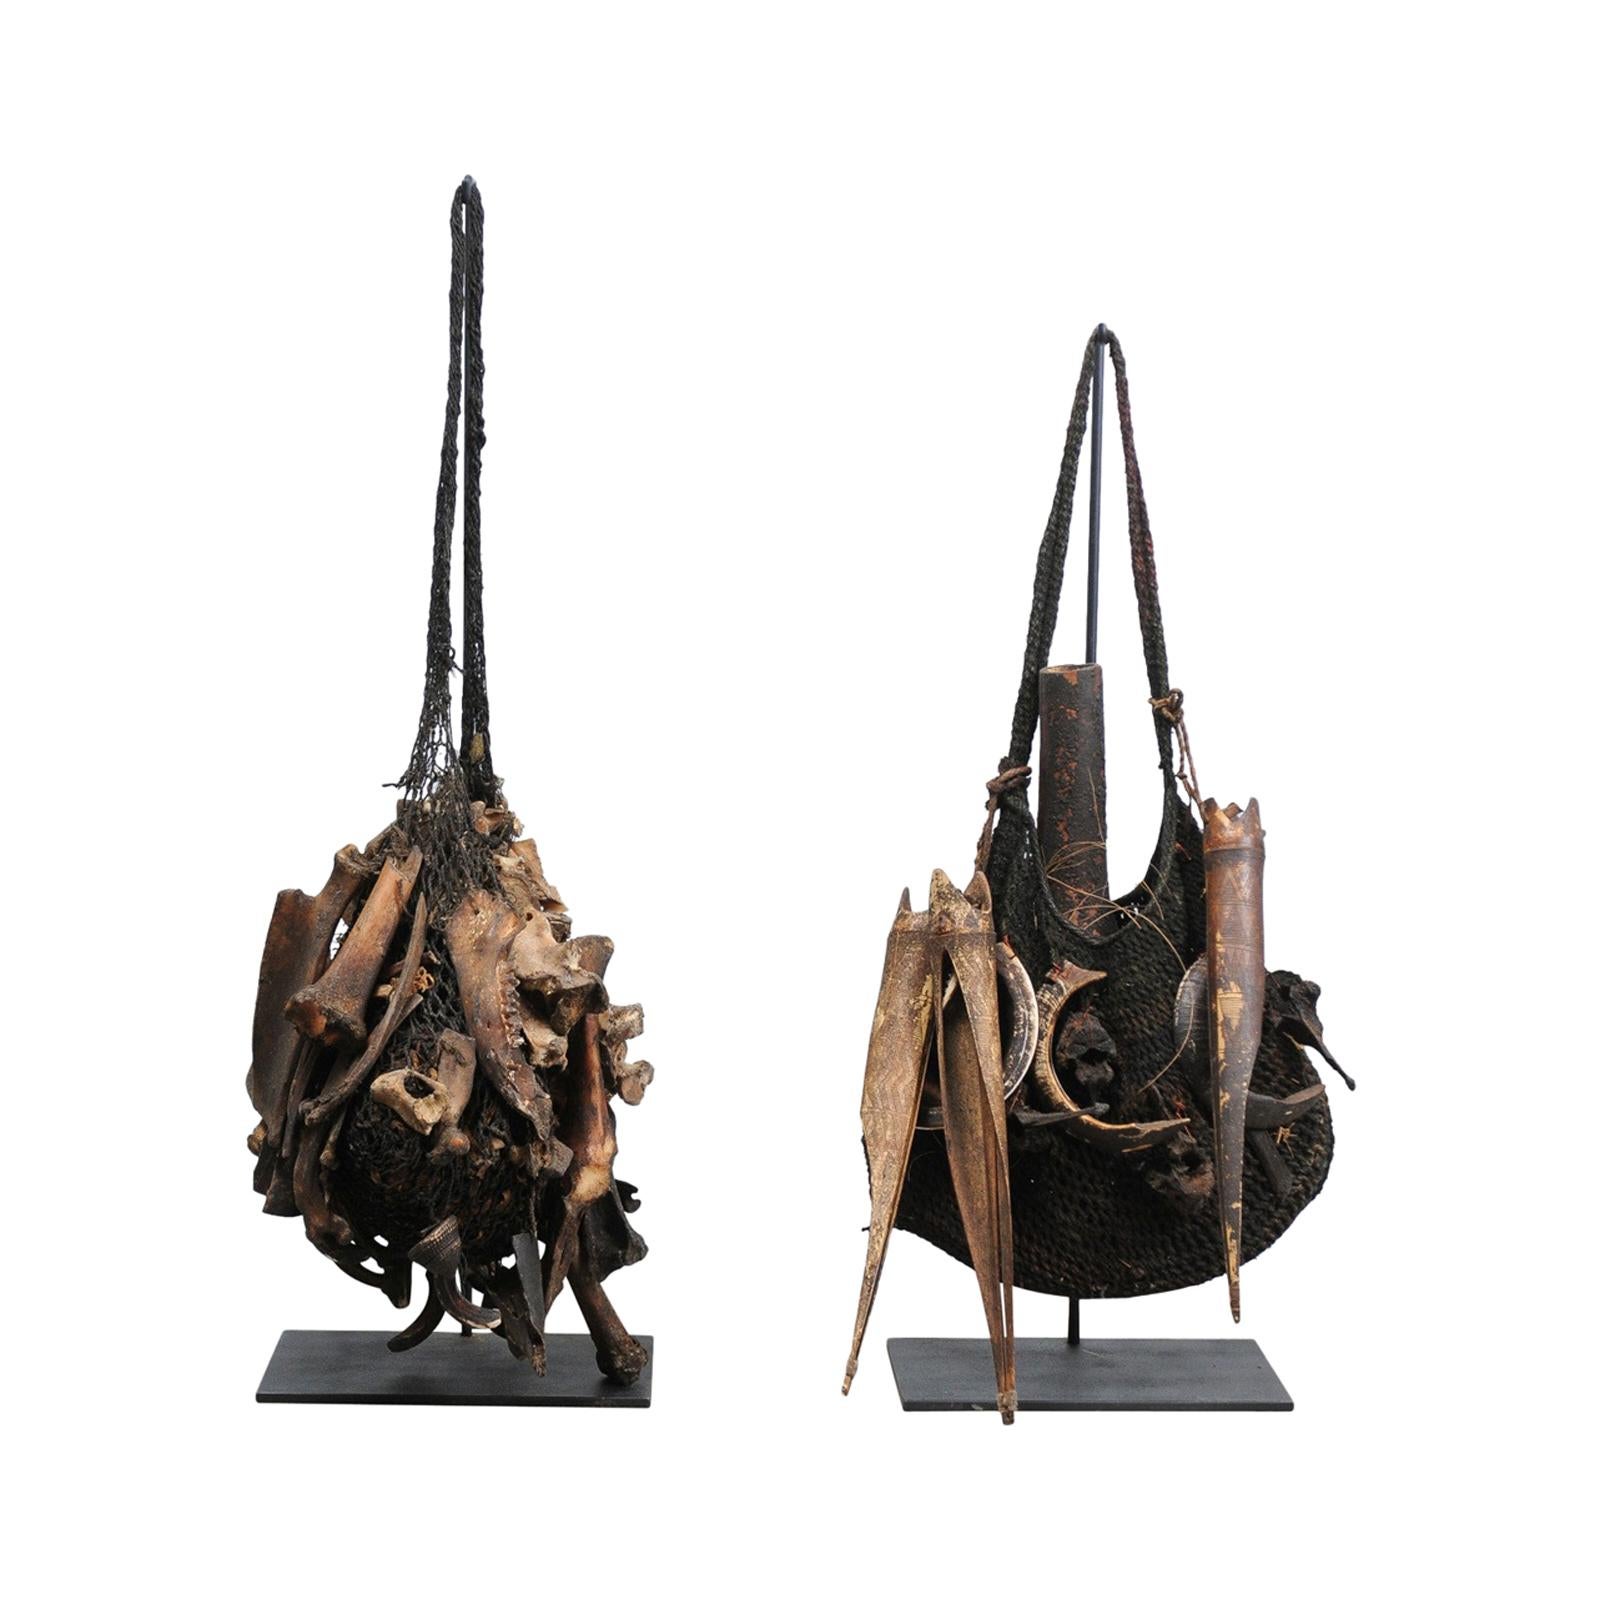 Pair of Papua New Guinea Tribal Medicine Bags from Mid-20th Century